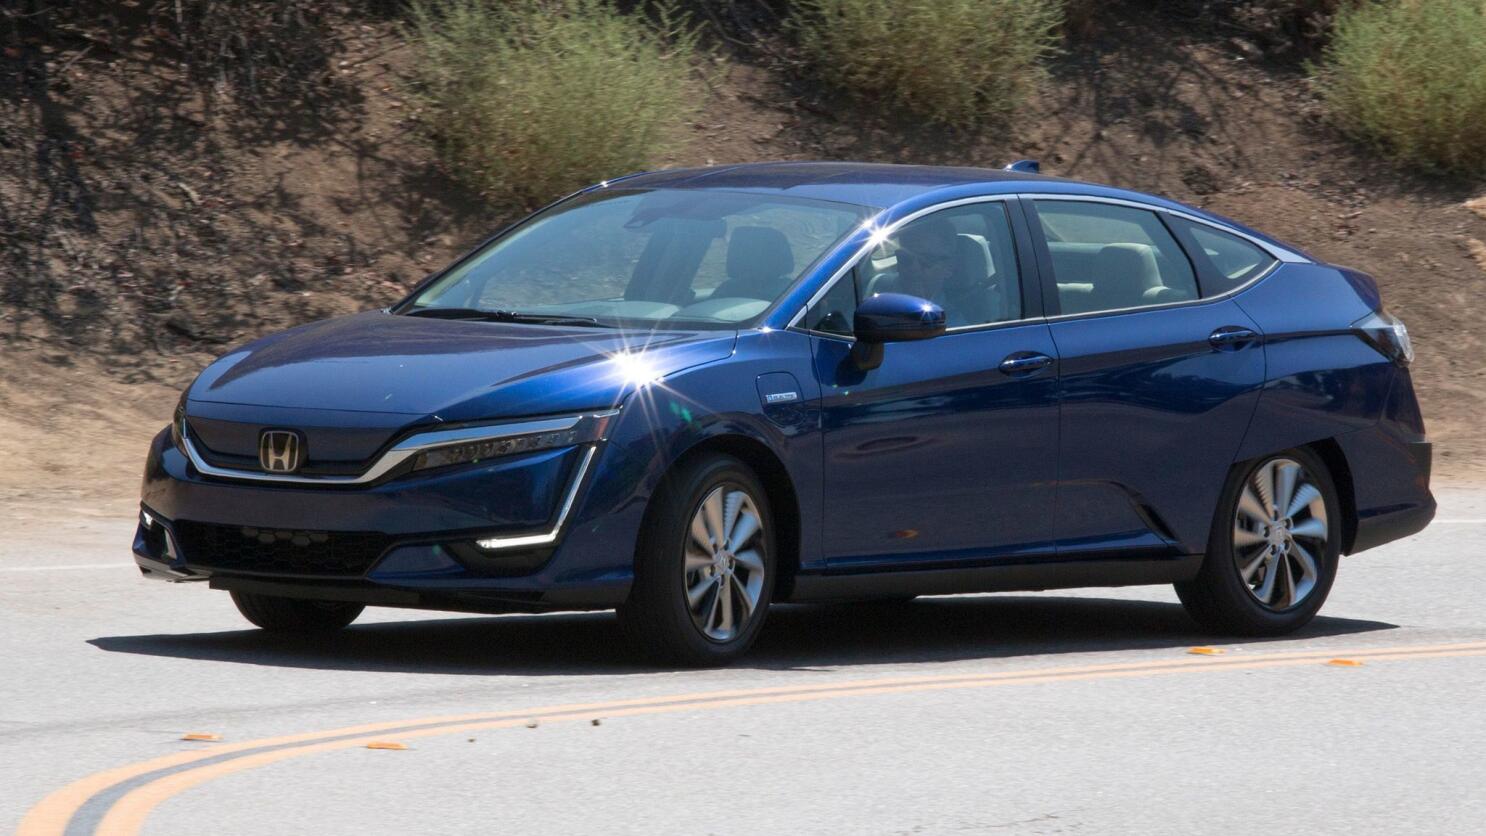 Honda Clarity Electric: A plug-in BEV with mid-size sedan style